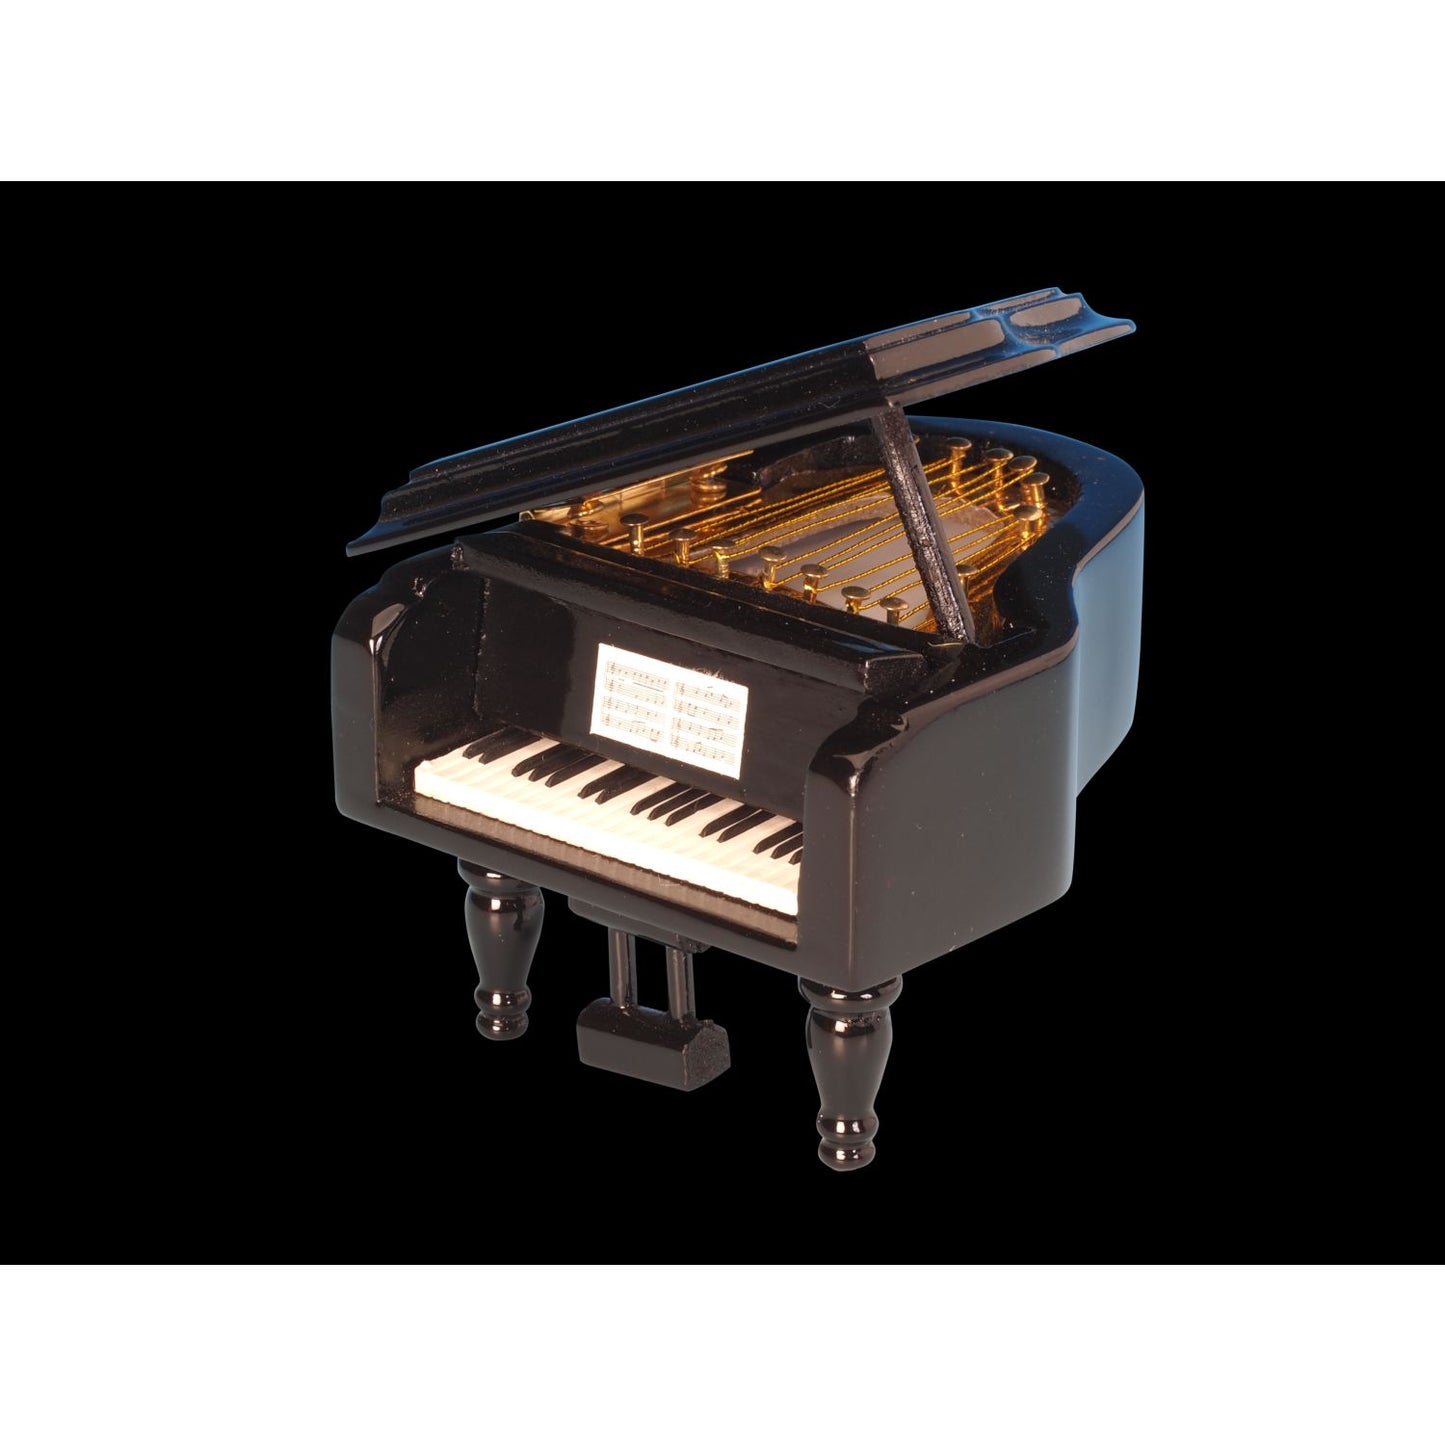 Musicbox Kingdom 2.2" Small Wooden Piano Plays The Melody “Magic Flute”